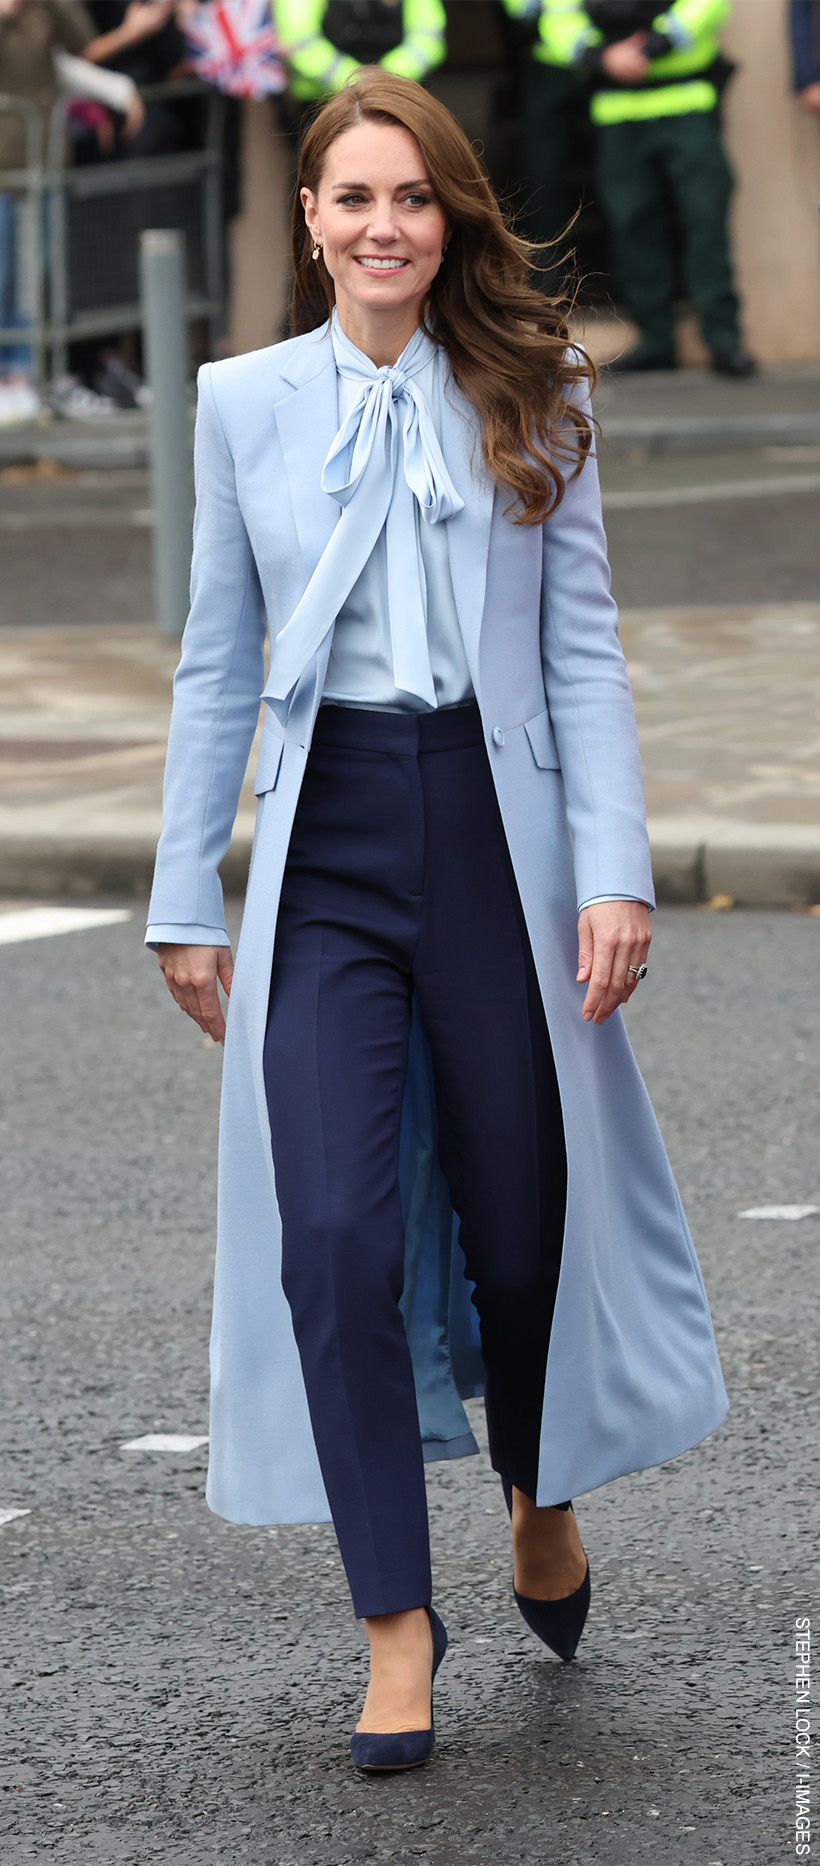 Kate Middleton, the Princess of Wales, dressed head-to-toe in blue.  The Princess is wearing the Winser Bow Blouse tied in a knot at the neckline. 